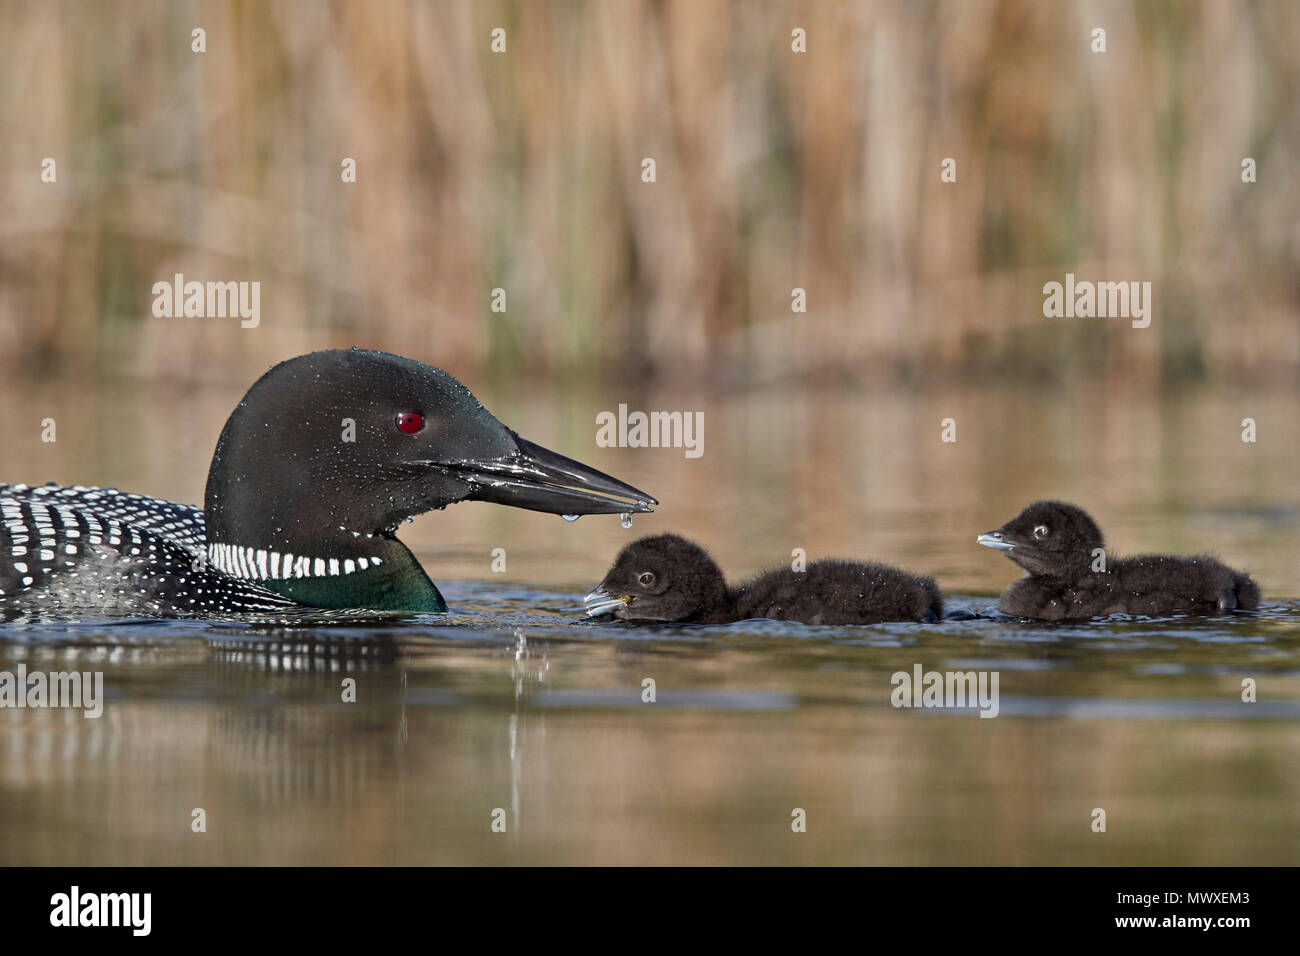 Common Loon (Gavia immer) adult and two chicks, Lac Le Jeune Provincial Park, British Columbia, Canada, North America Stock Photo